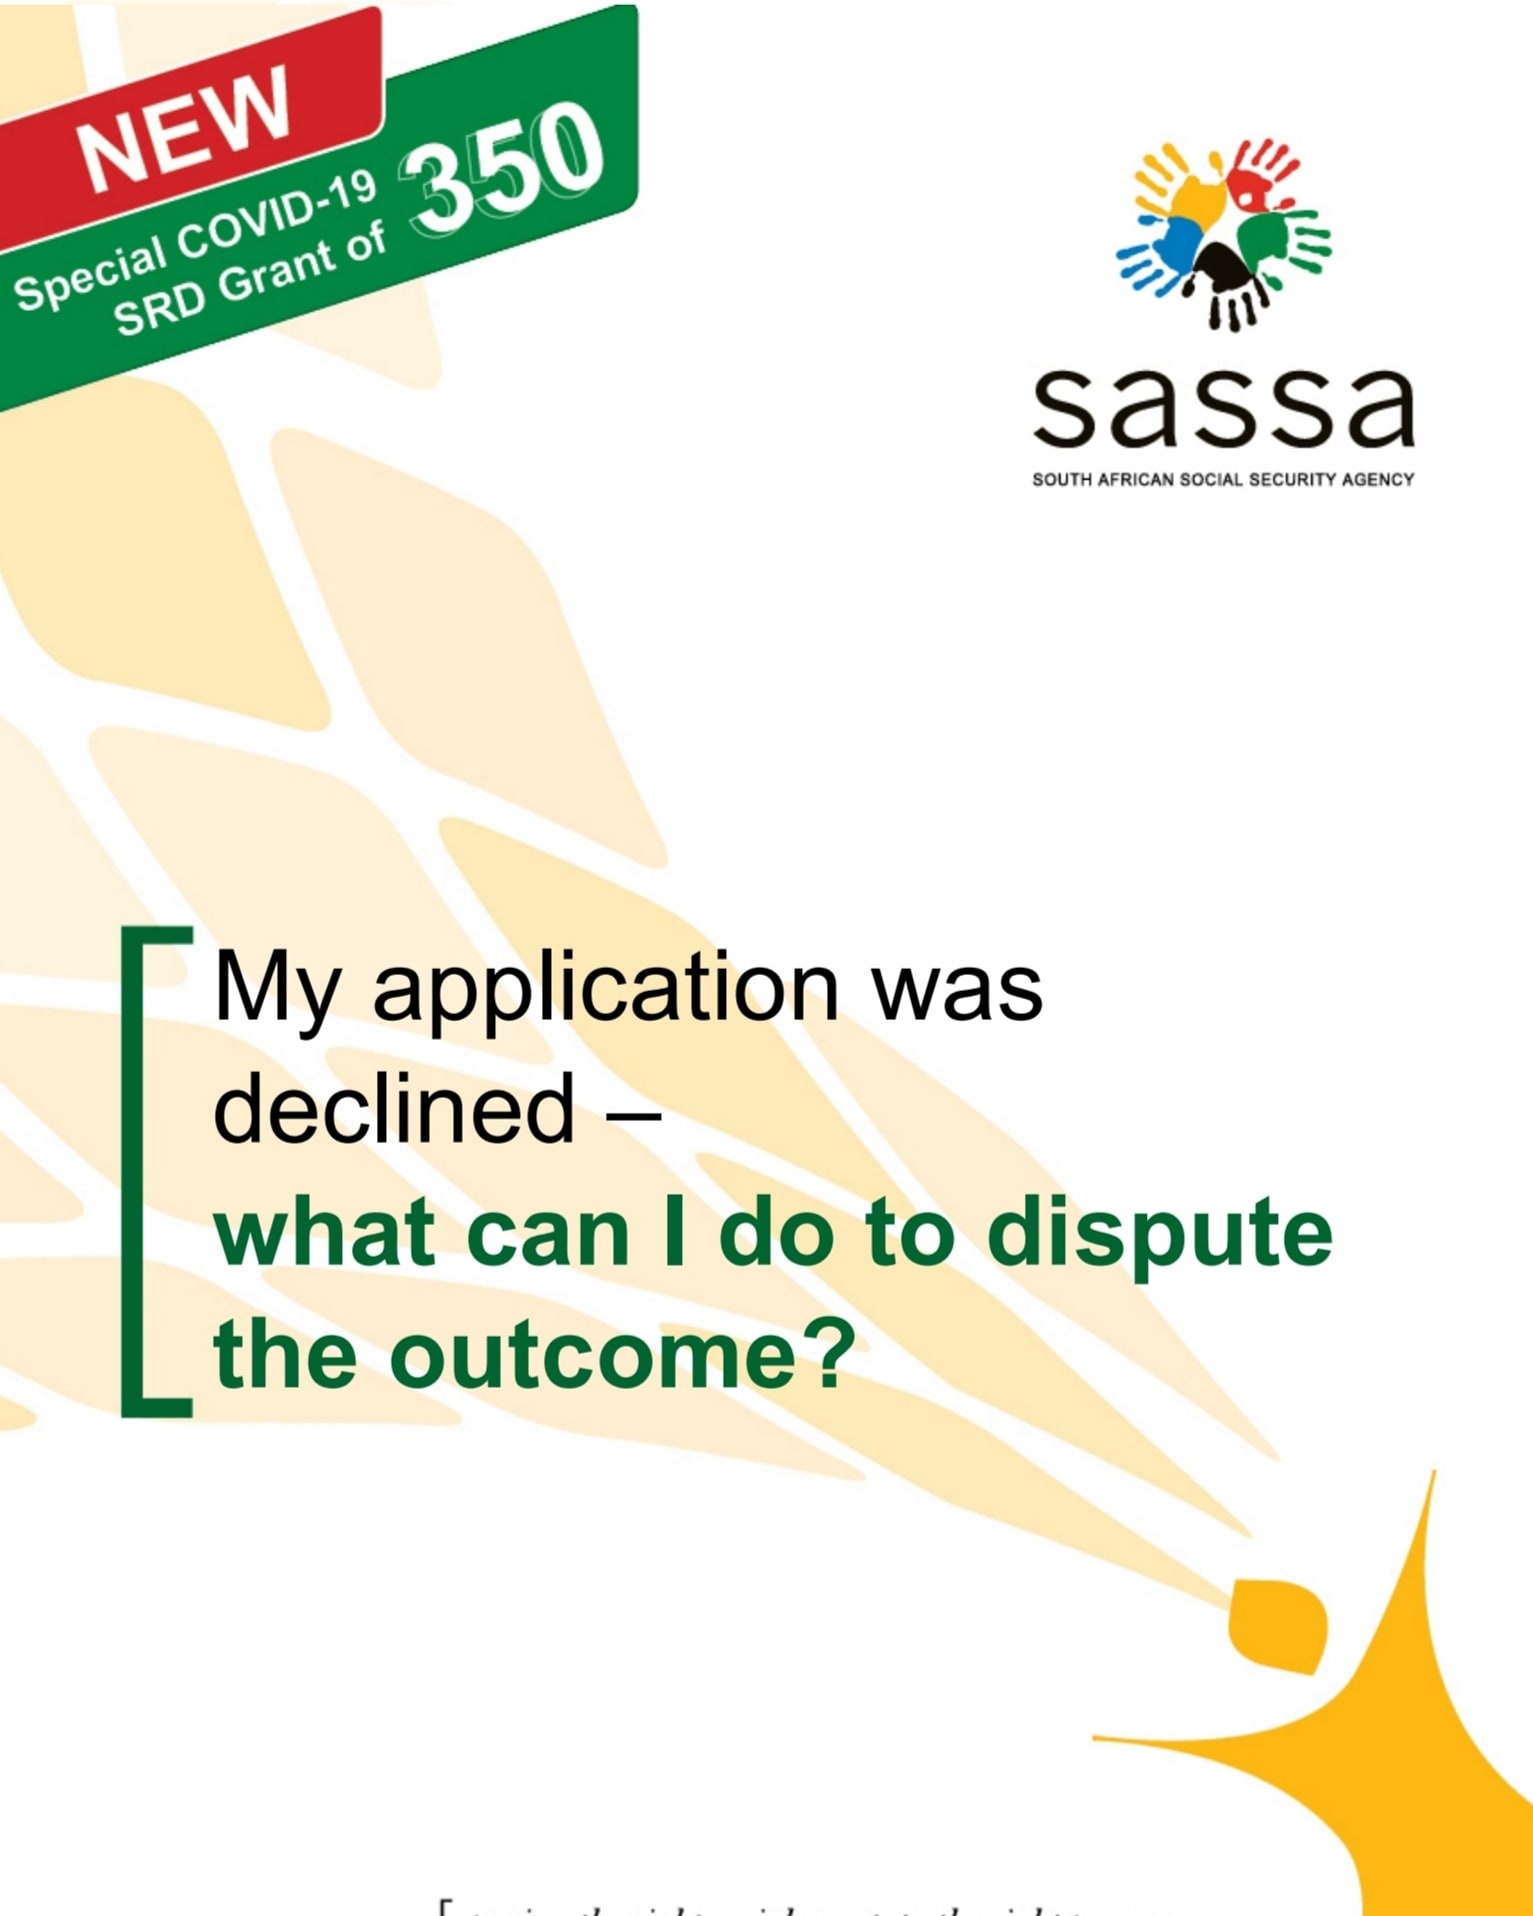 SASSA rejects your COVID-19 applications